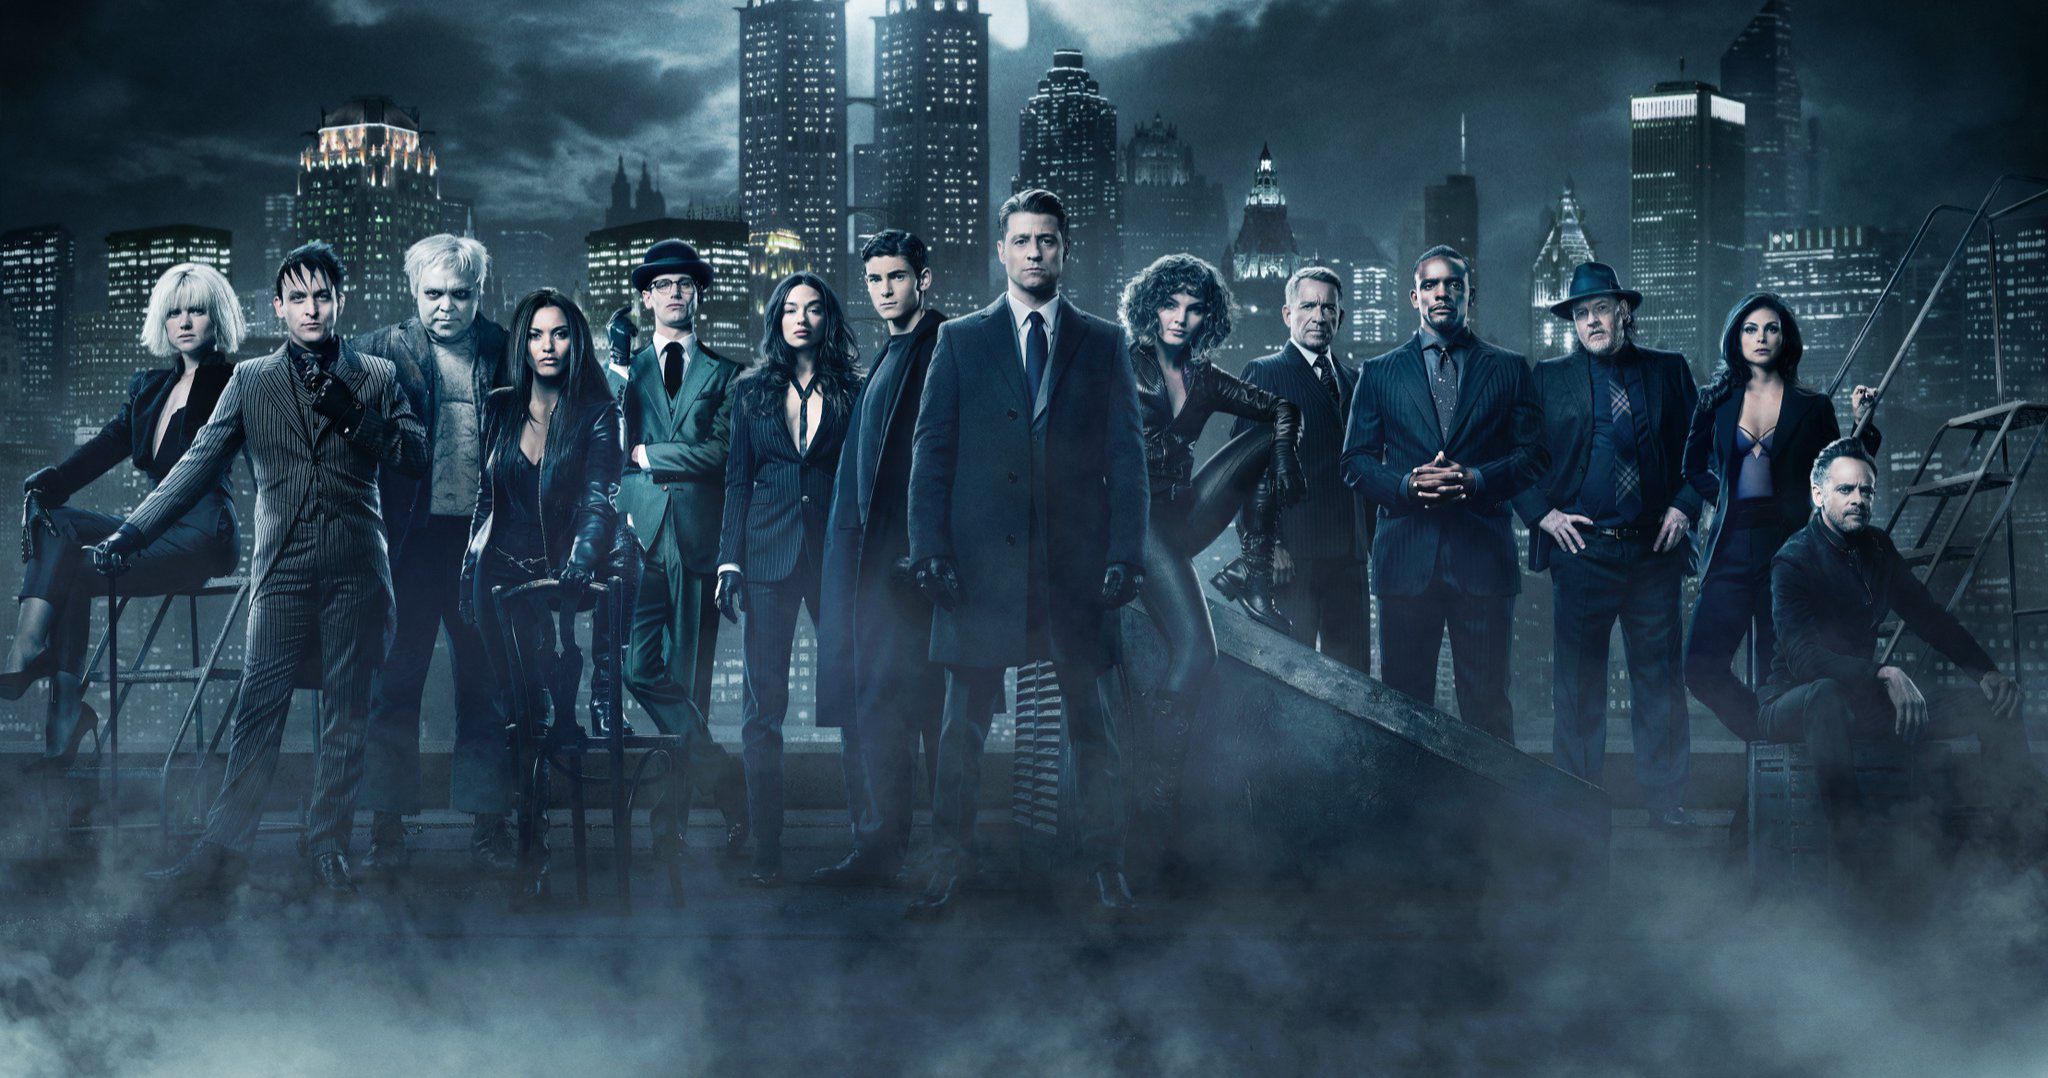 #SaveGotham Trends as Fans Campaign to Revive the Batman Prequel Series